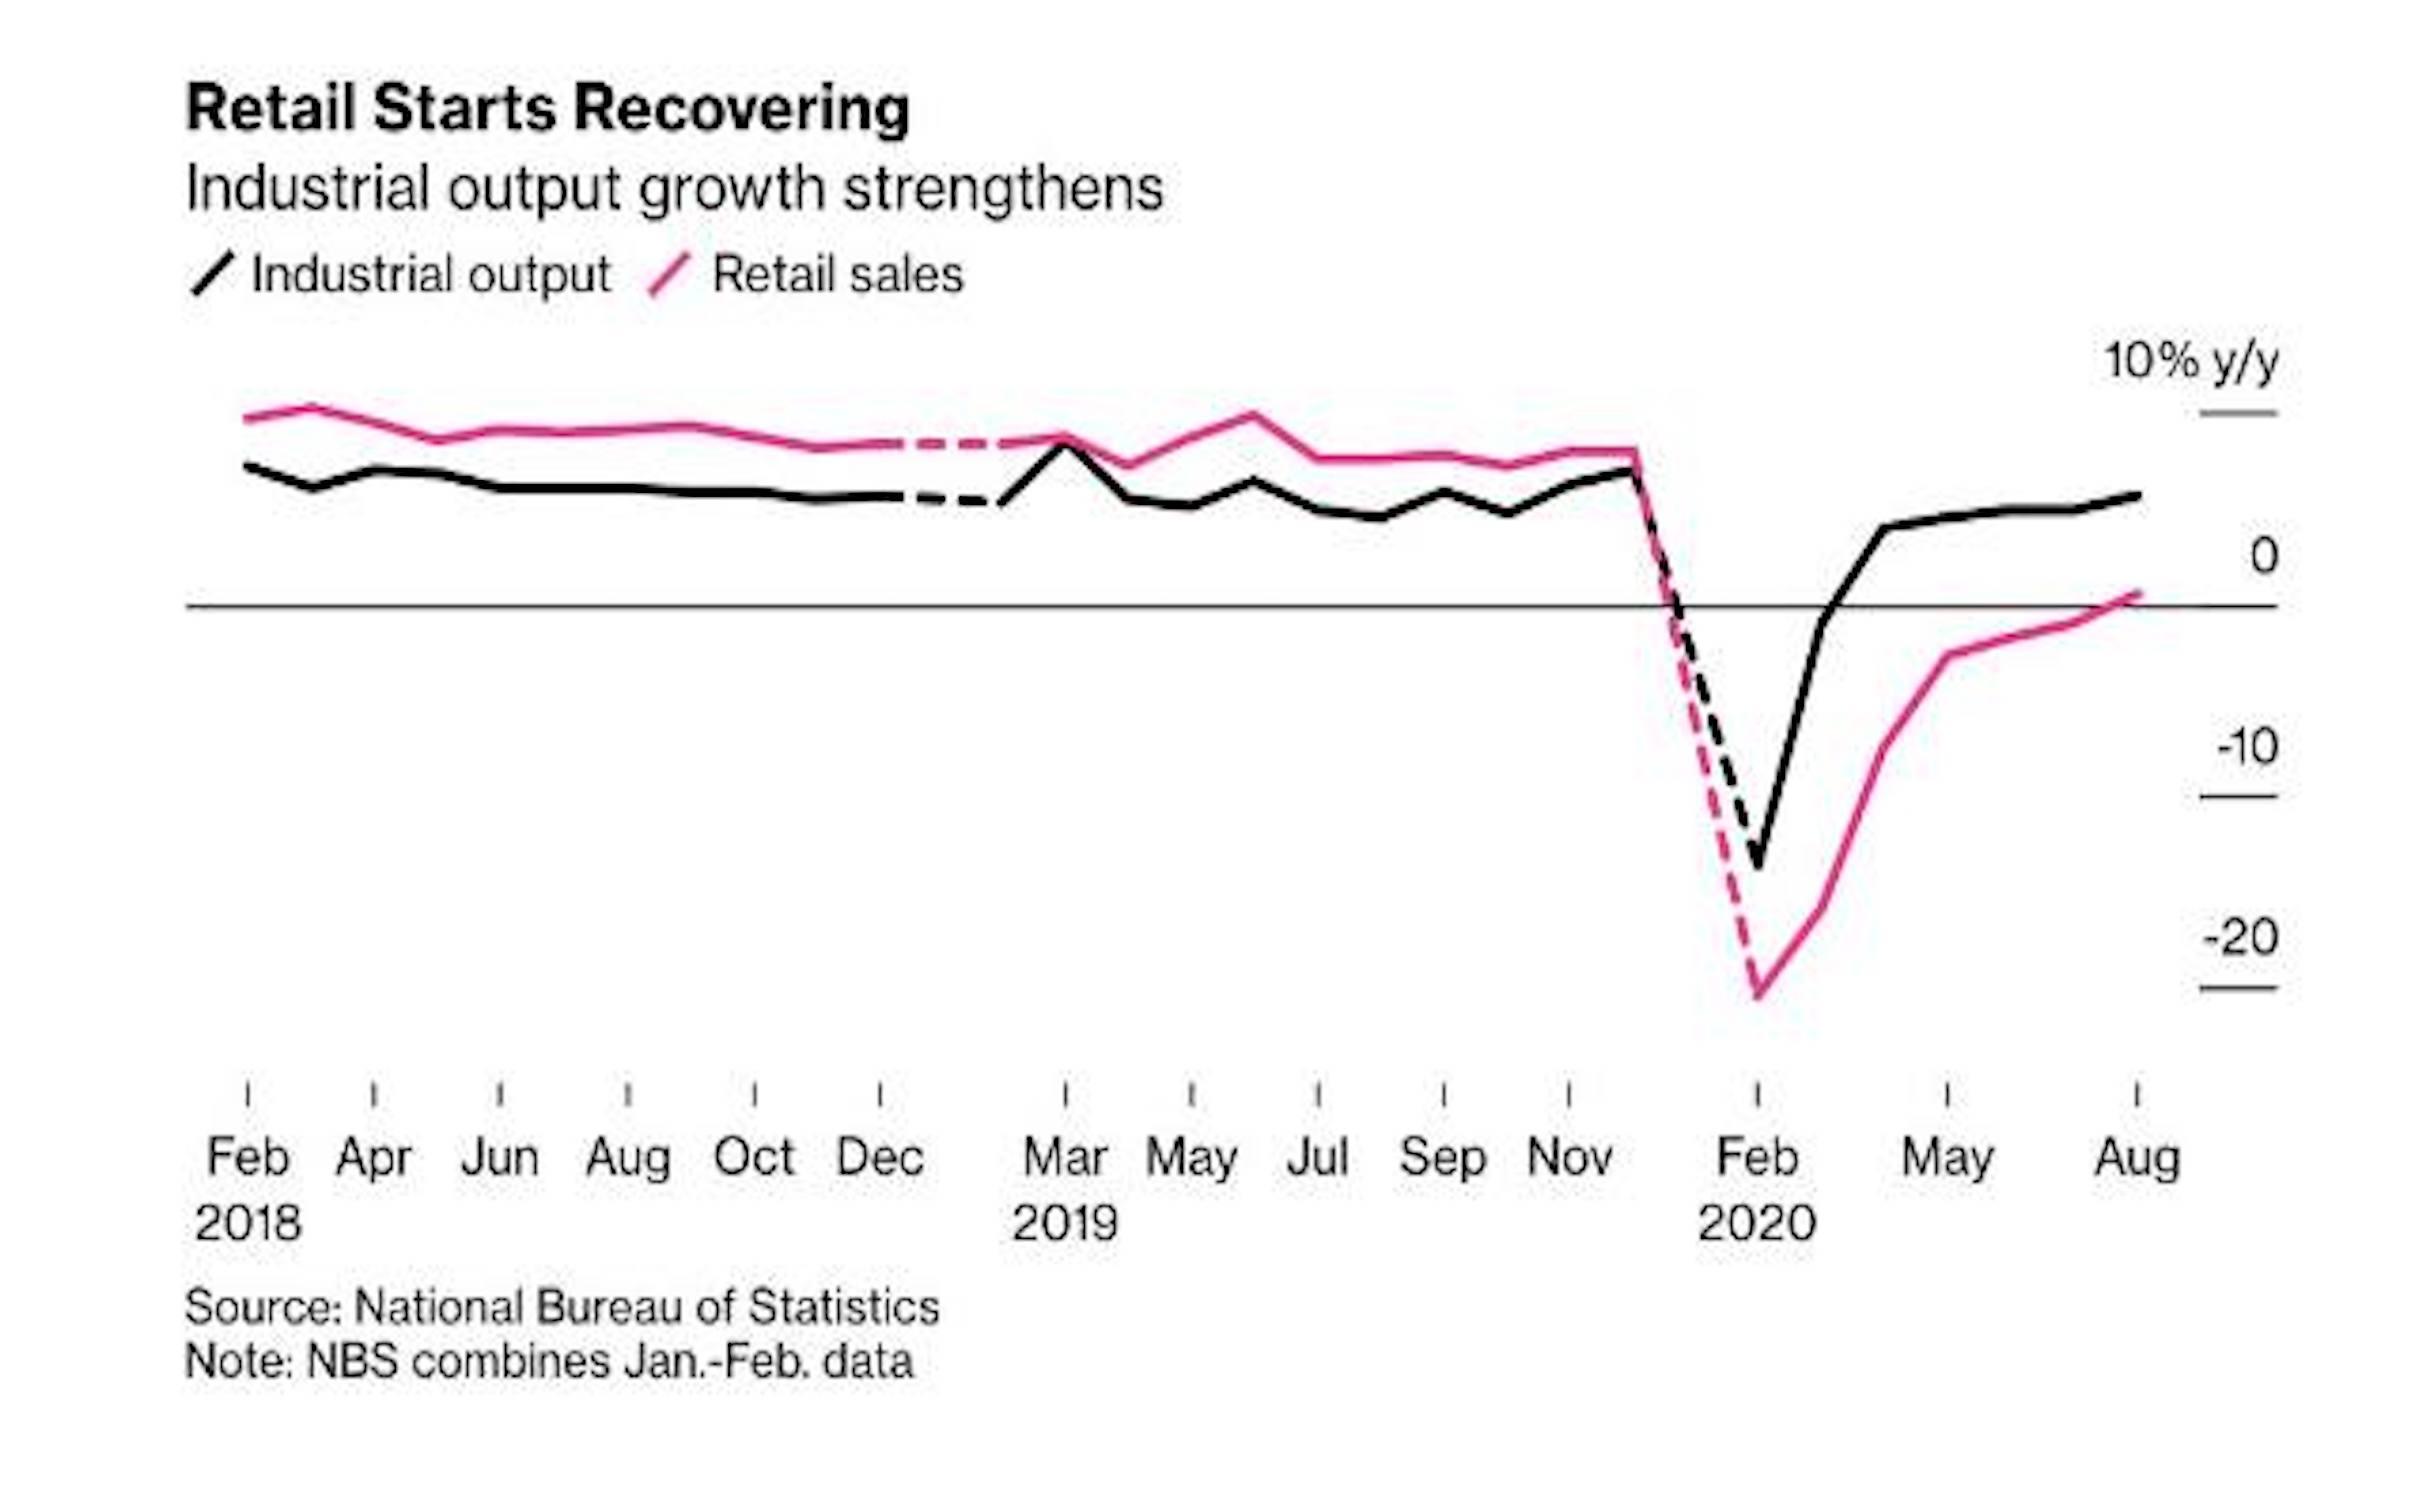 China’s recovering economy